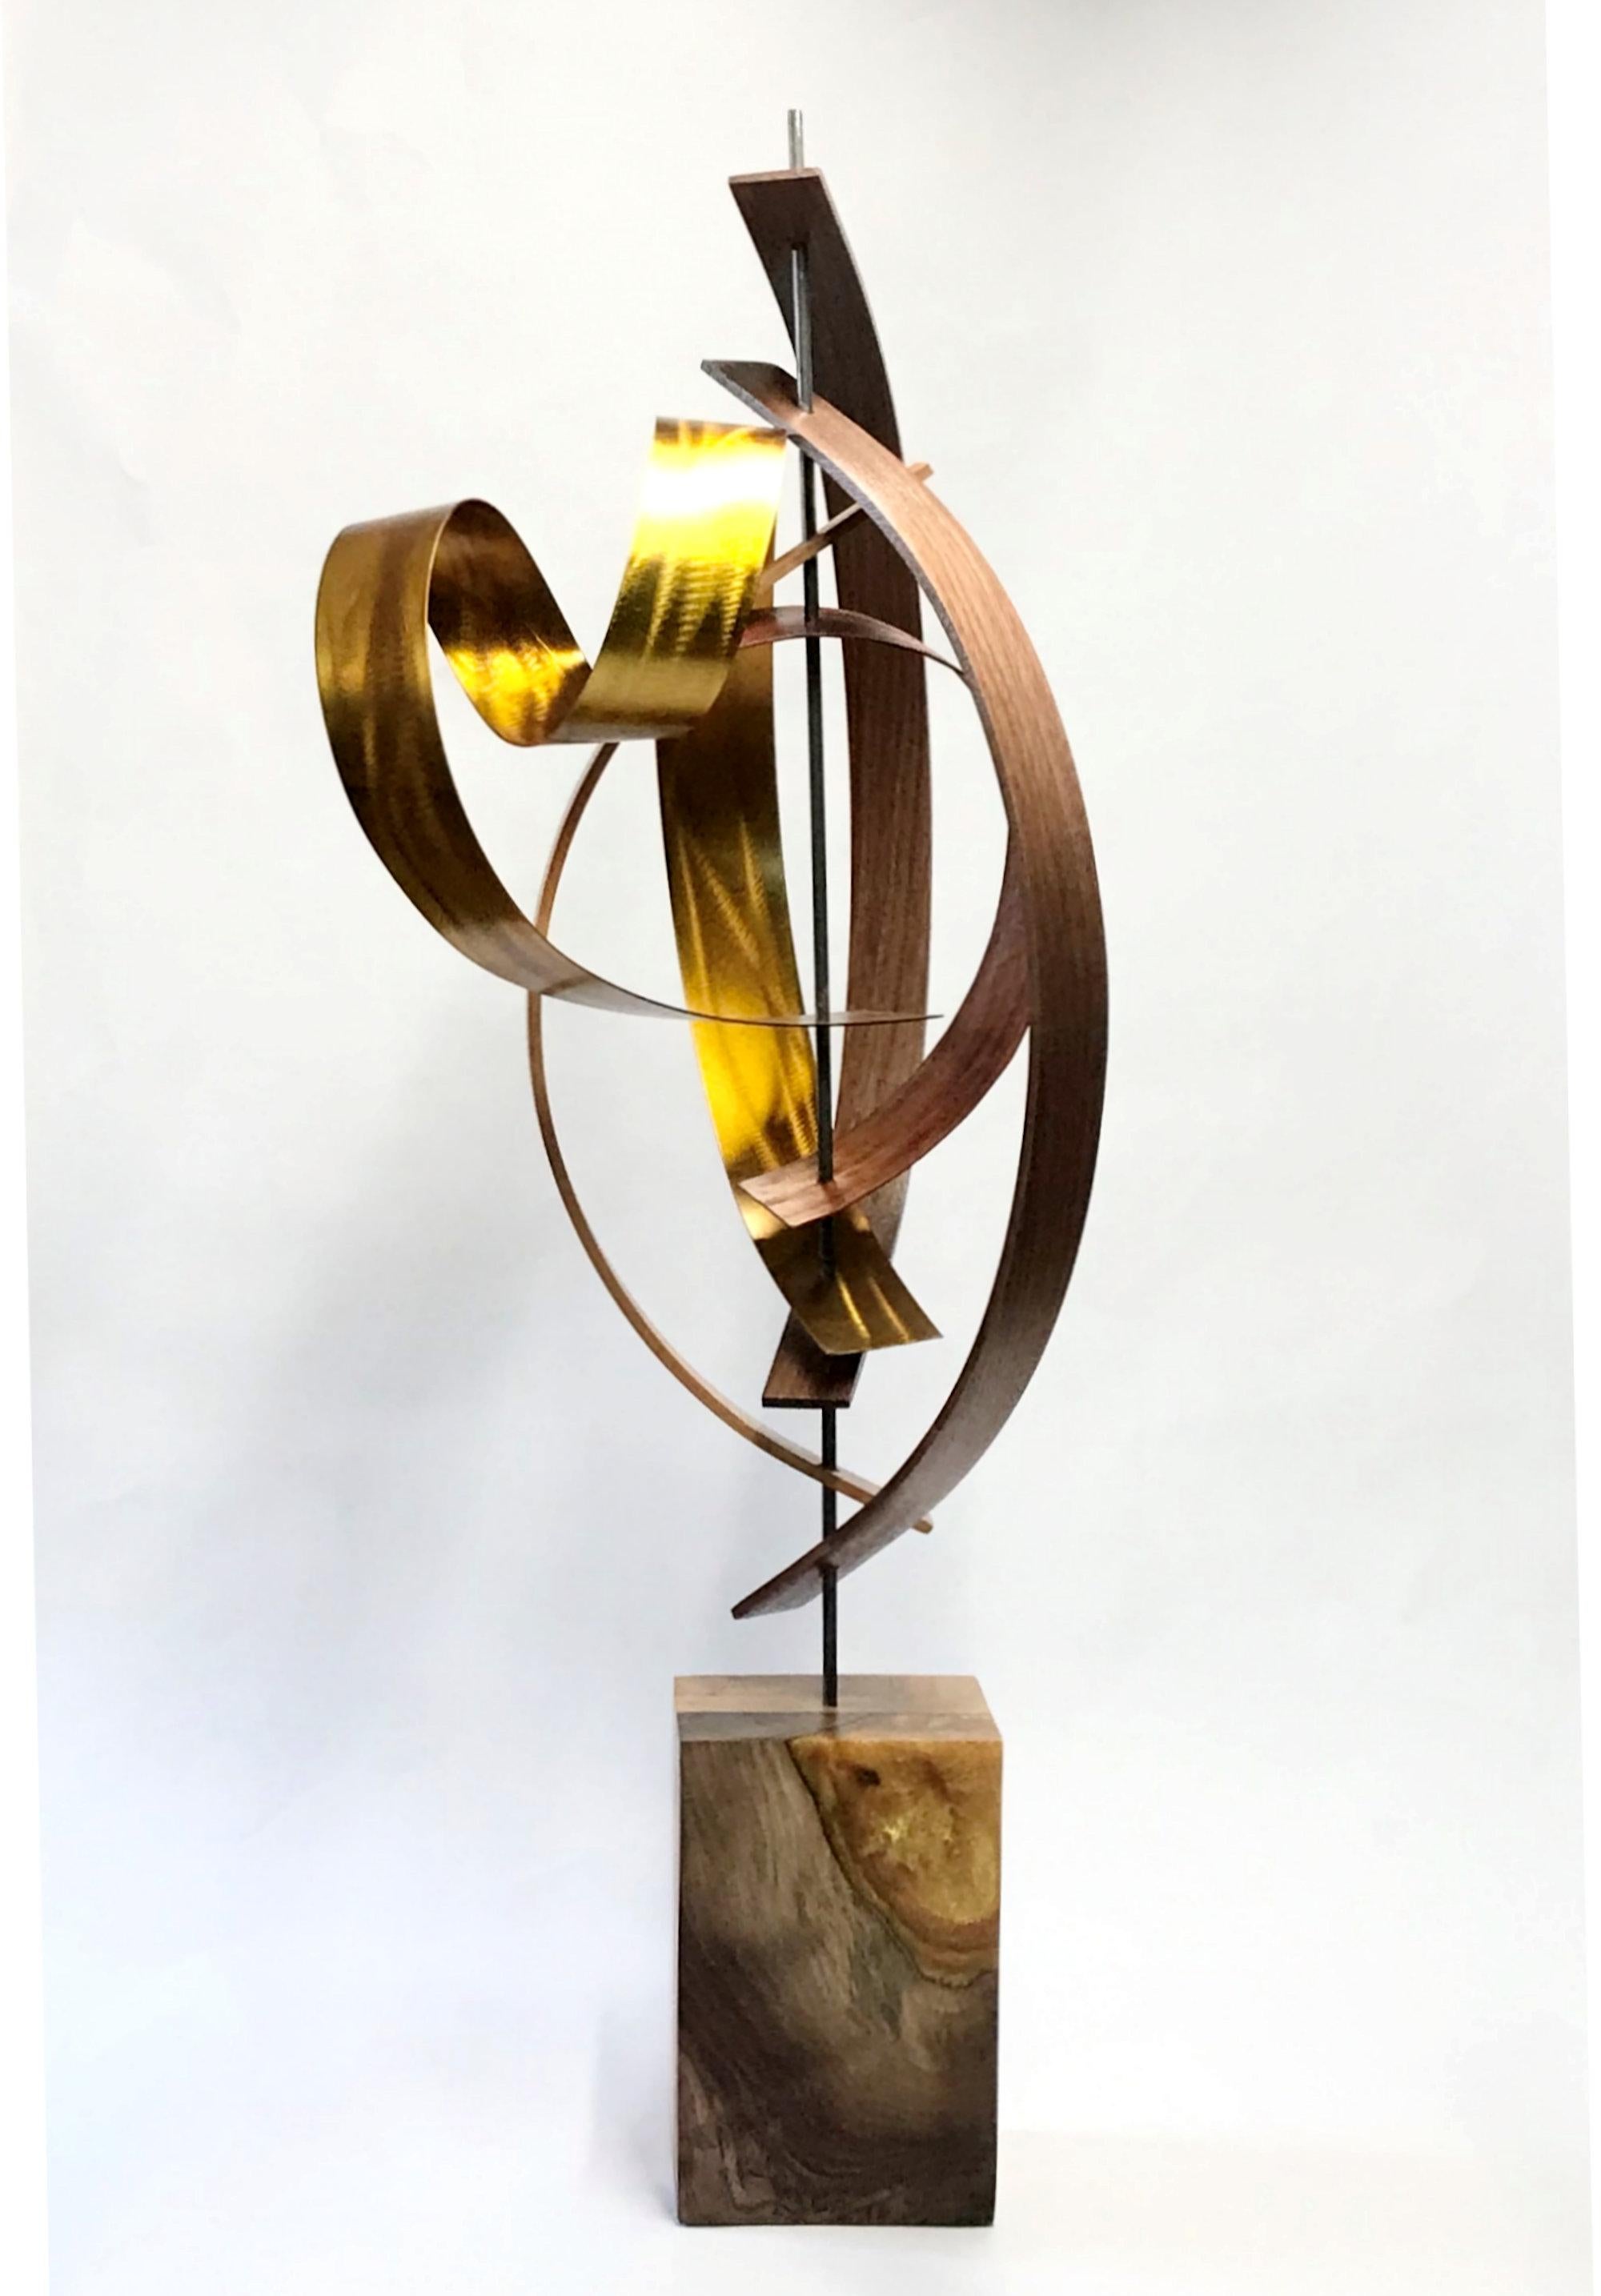 Wood Metal Sculpture, Mid-Century Modern Inspired, Original Contemporary Art  - Mixed Media Art by Unknown